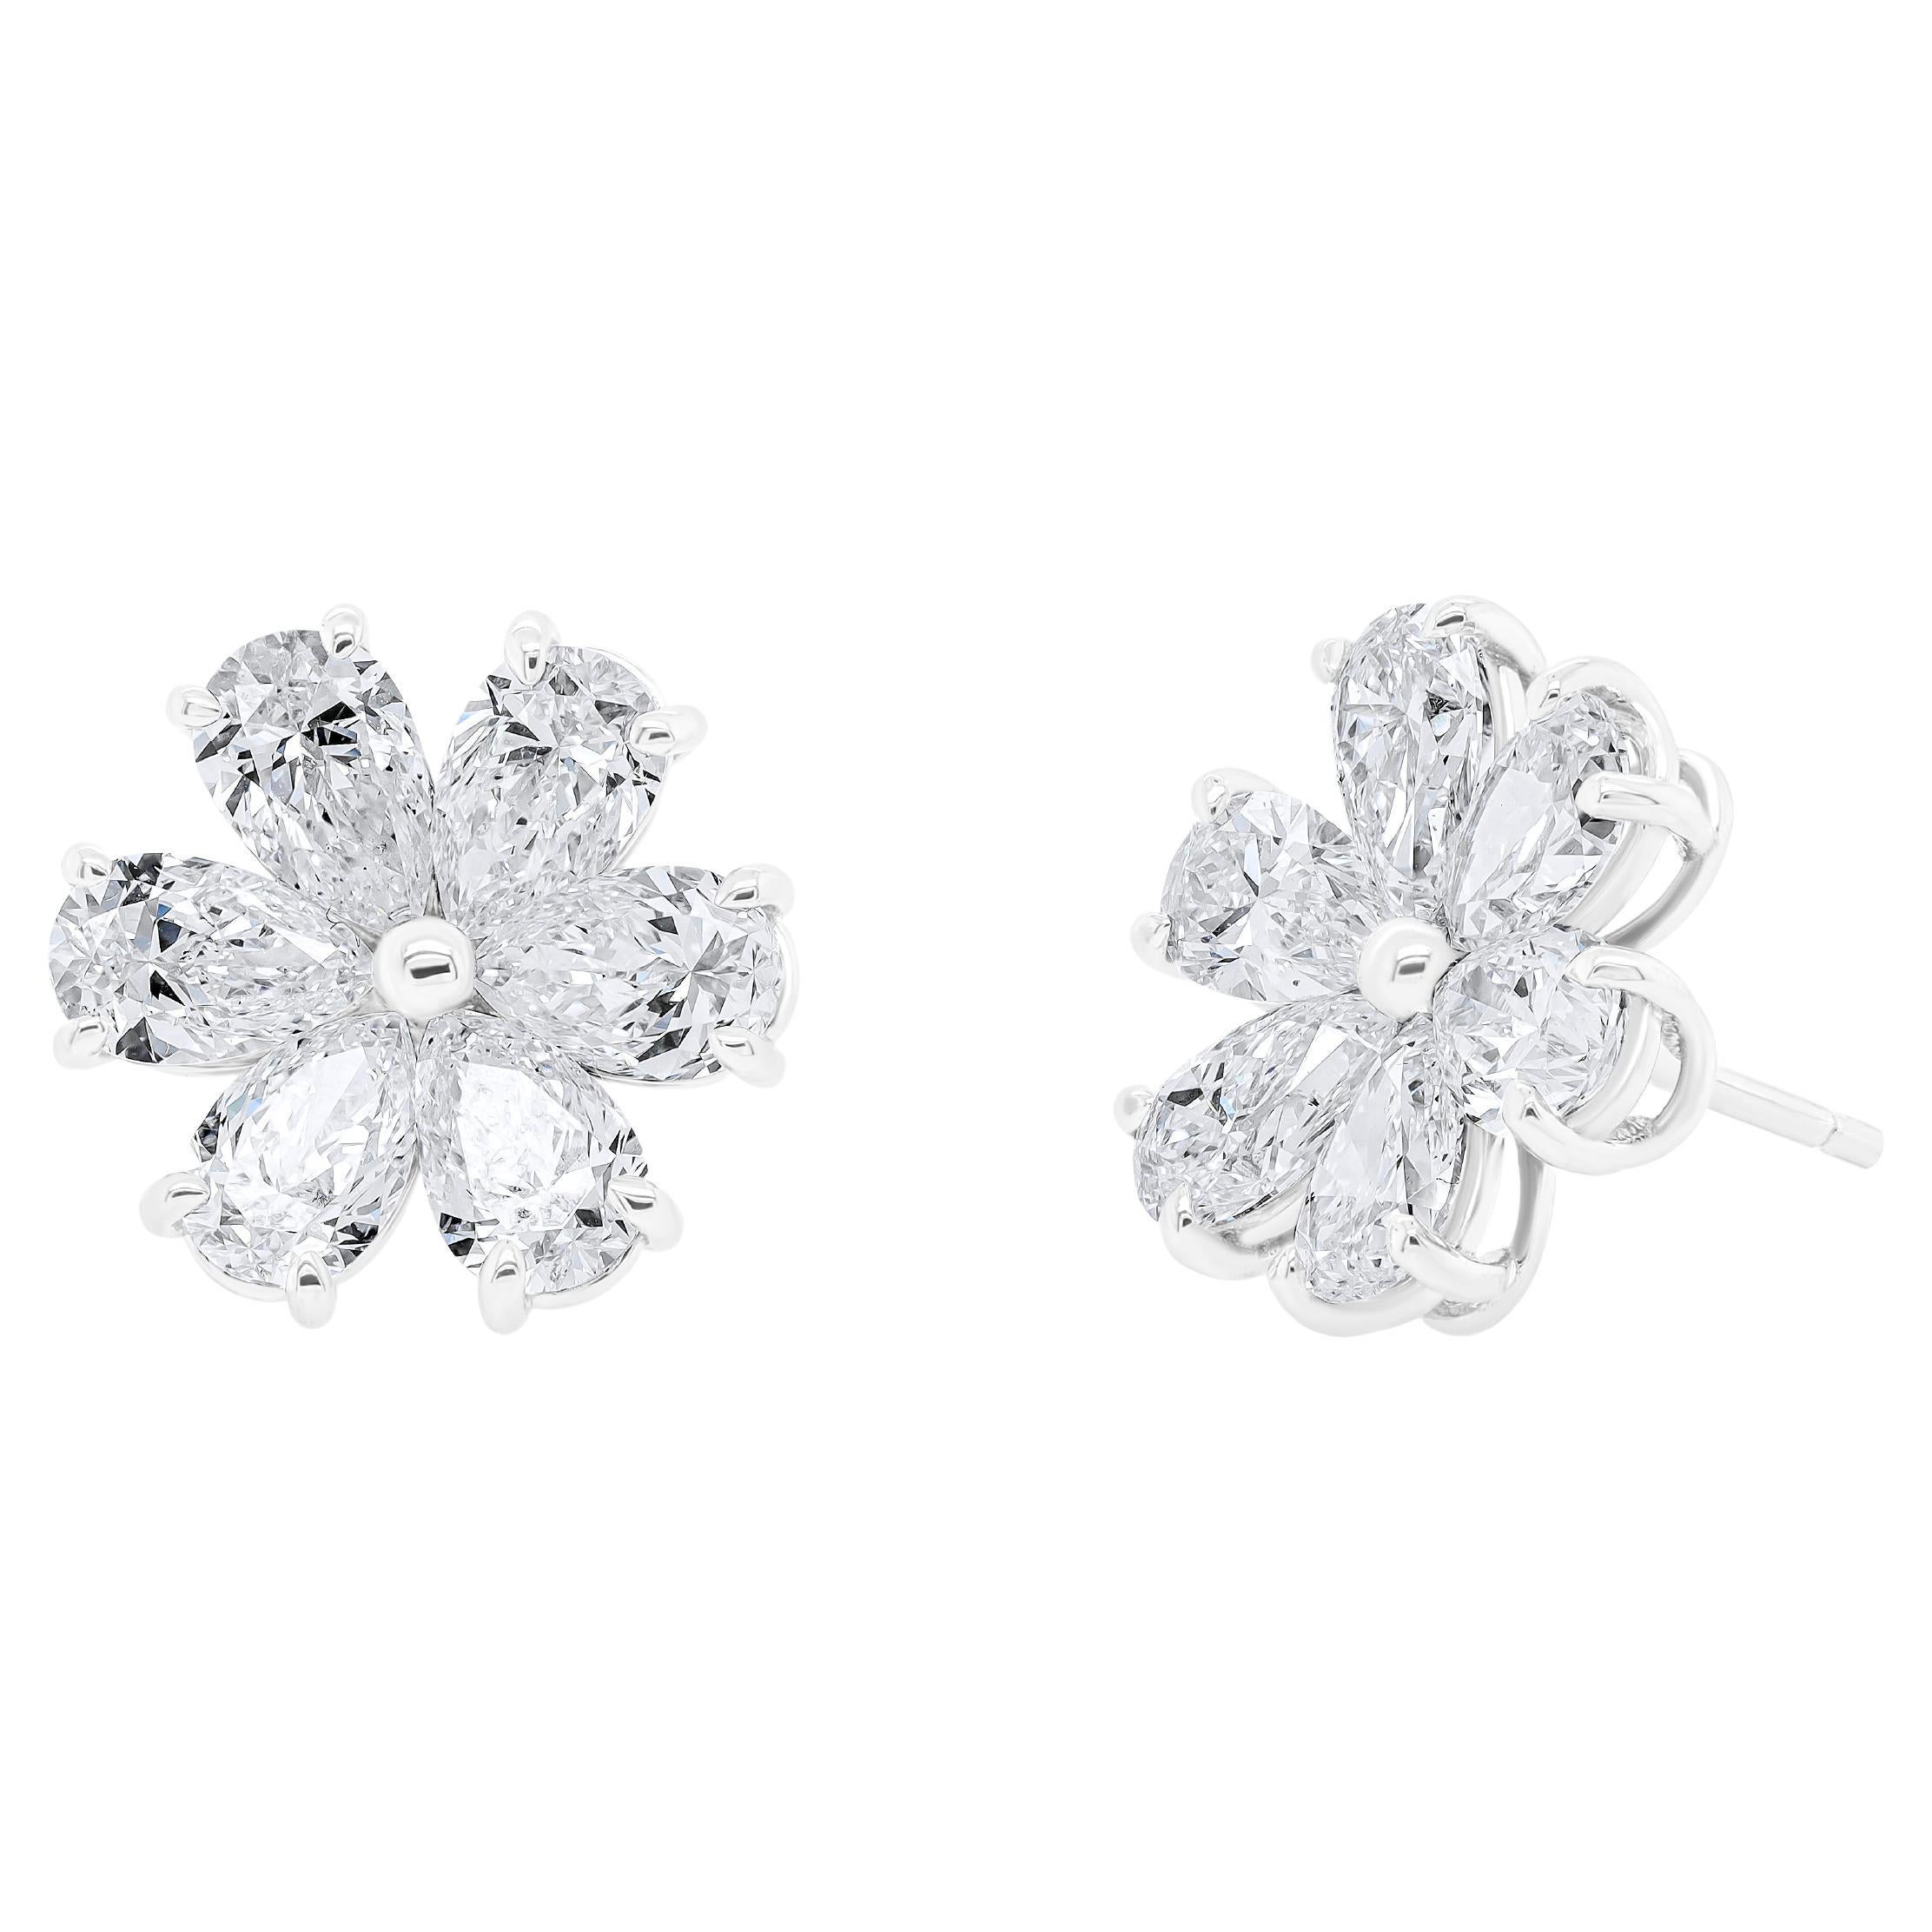 18Kt White Gold Diamond Flower Earrings Featuring 6.05cts or 12 GIA certified  pear shape matching diamonds. D-G in color and VS clarity. 

